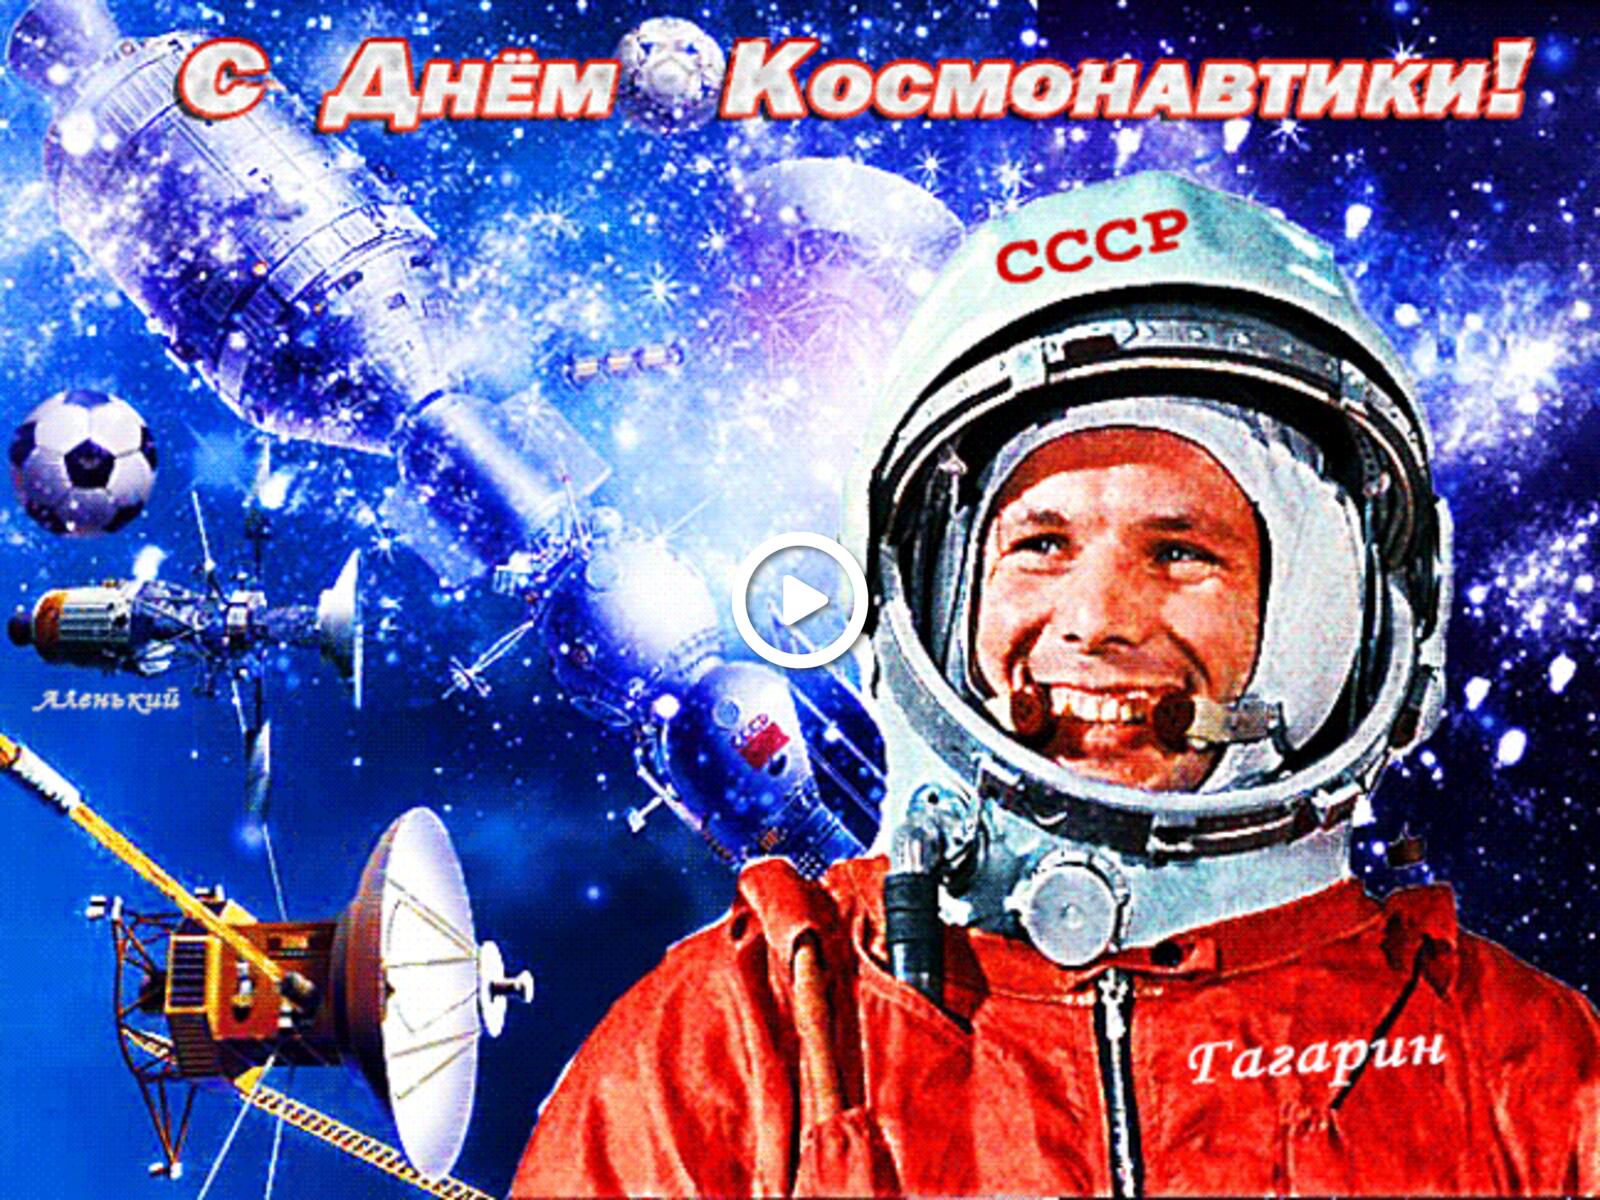 A postcard on the subject of gagarin holidays april 12 for free